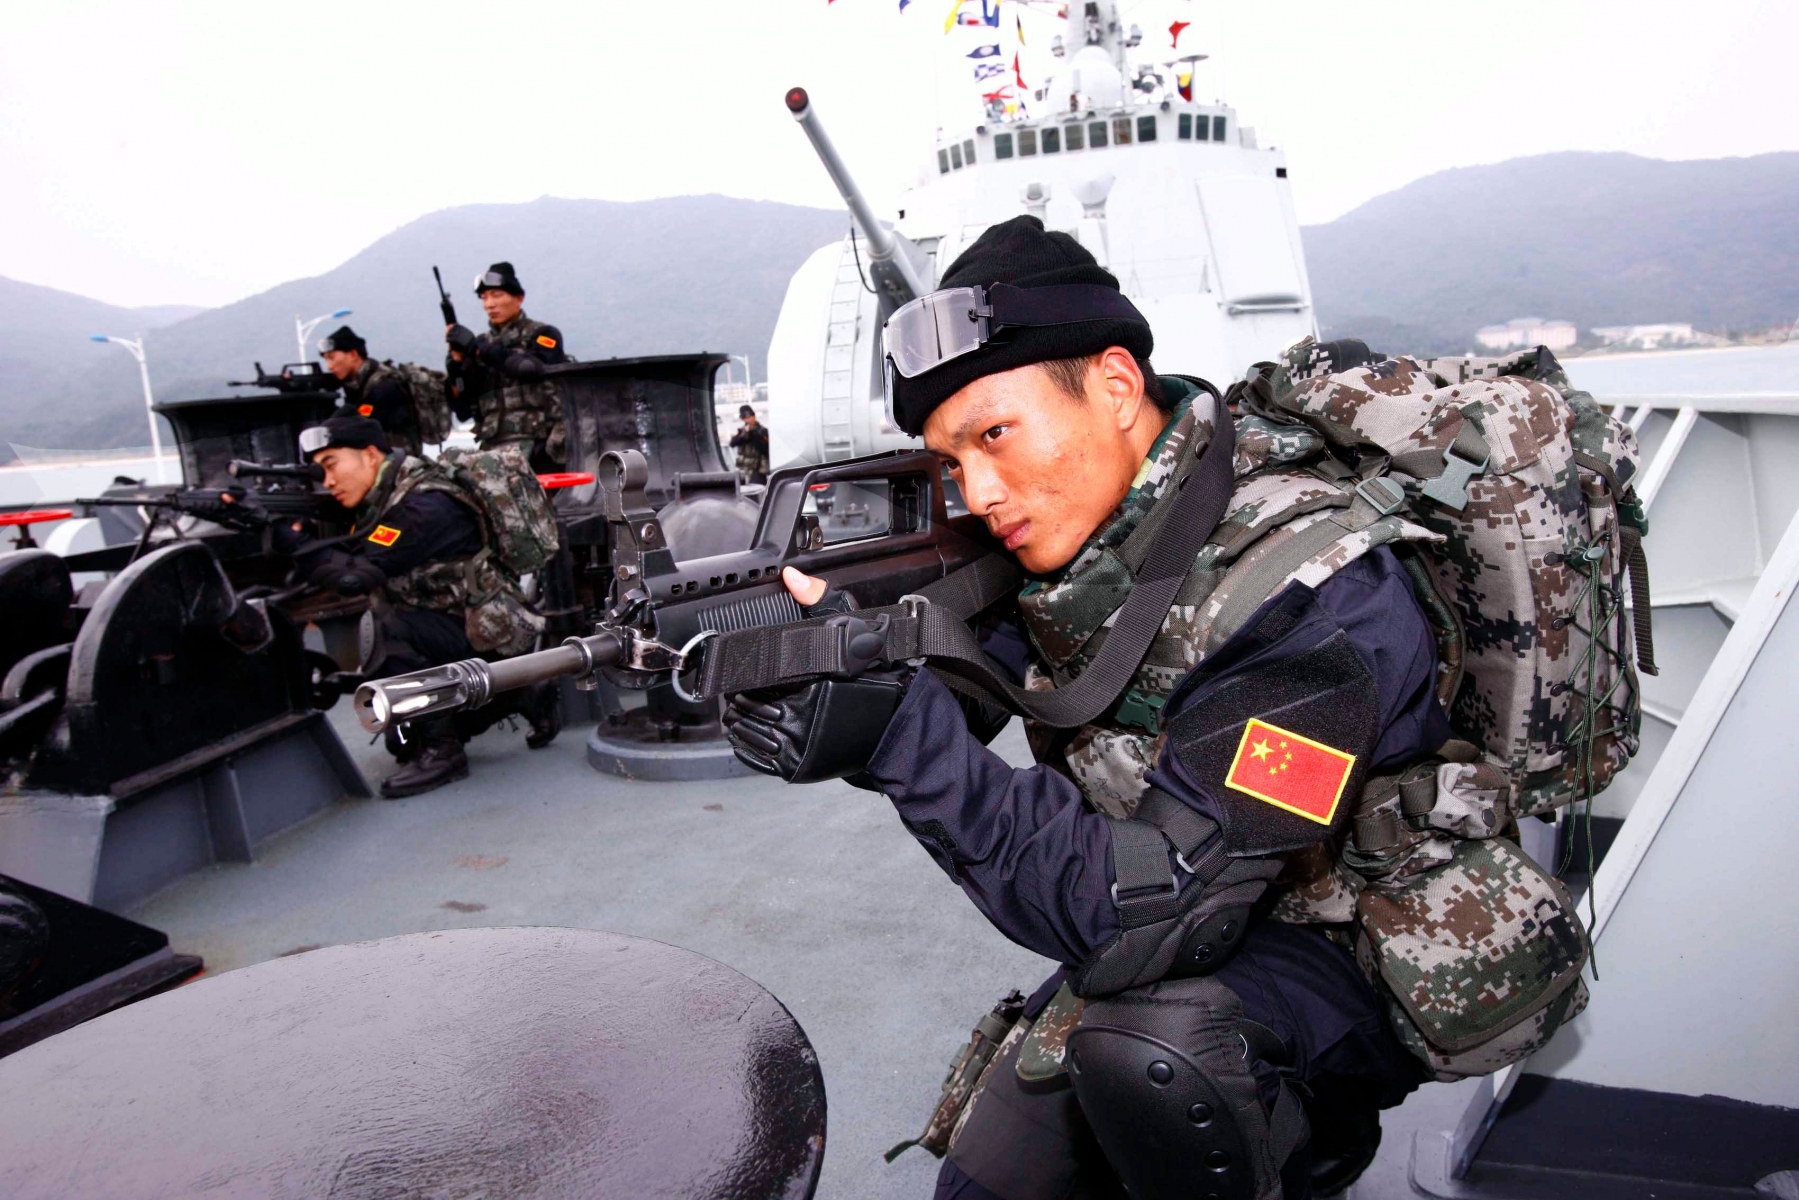 In this photo released by China's Xinhua News Agency, soldiers of Chinese navy special force carry out an anti pirate drill on the deck of DDG-171 Haikou destroyer in Sanya, capital of South China's Hainan Province Thursday, Dec. 25, 2008. On Friday, warships armed with special forces, missiles and helicopters will sail for anti-piracy duty off Somalia, the first time the communist nation has sent ships on a mission that could involve fighting so far beyond its territorial waters. (AP Photo/Xinhua, Zha Chunming) === PHOTO RELEASED BY CHINA'S XINHUA NEWS AGENCY ===  CHINA PIRATERIE